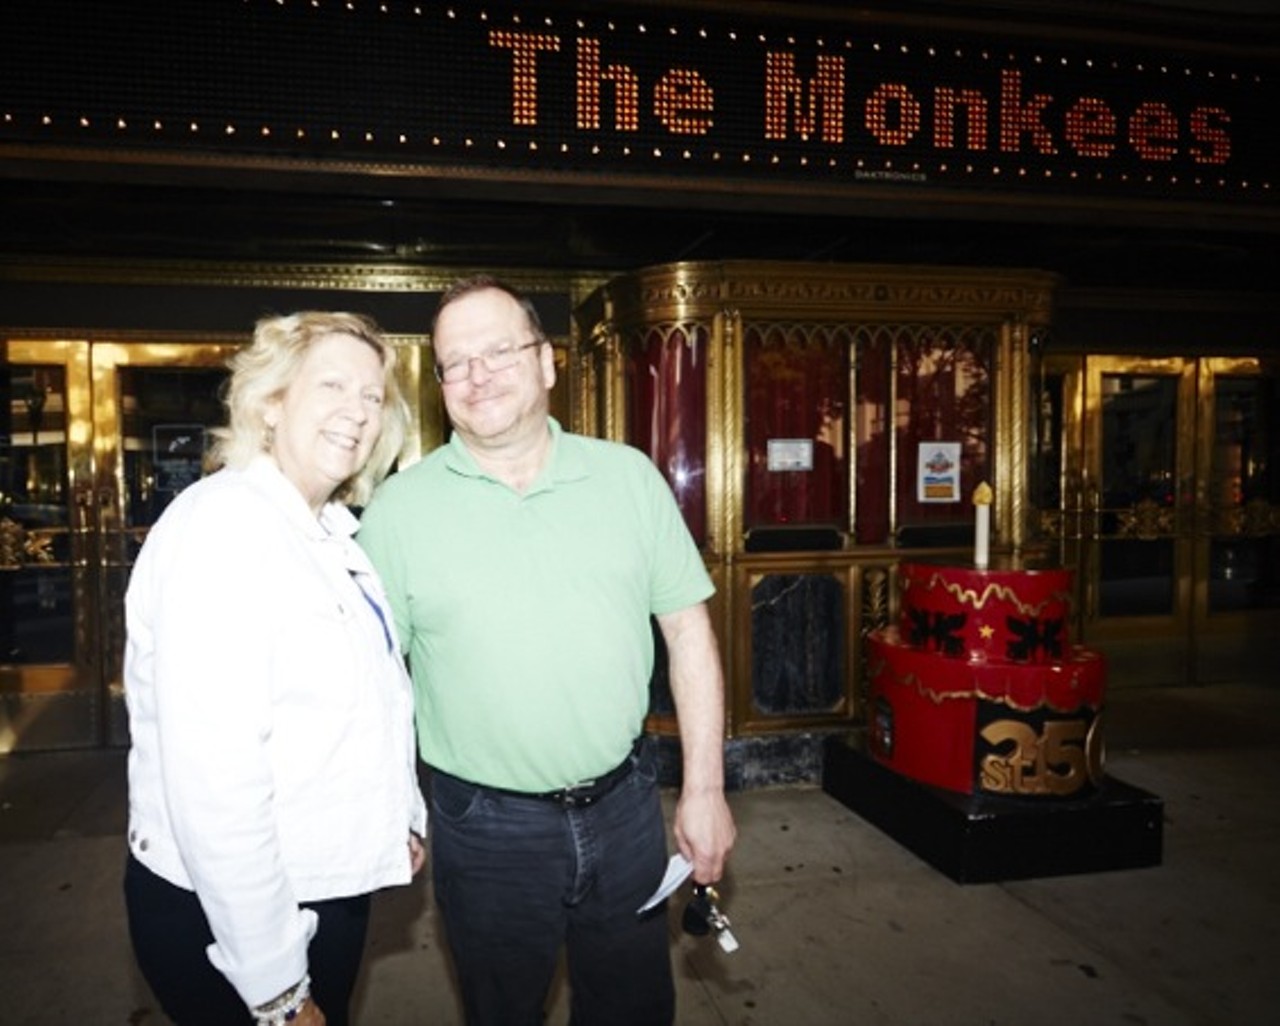 The Monkees at the Fabulous Fox Theatre